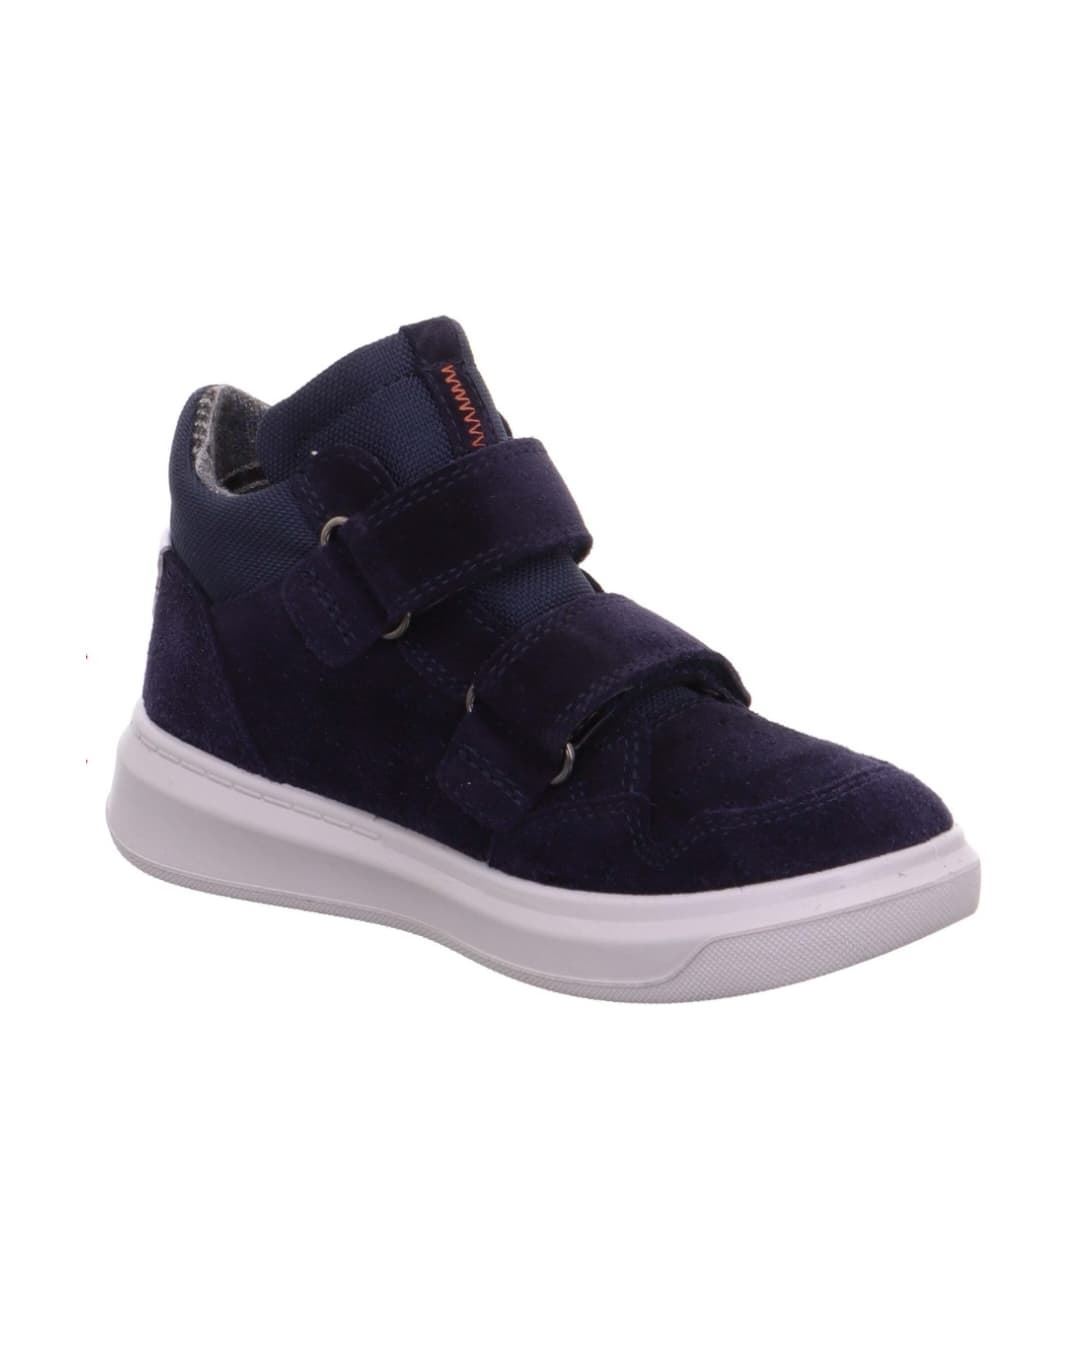 Superfit Gore-tex Boots for Kids Navy Blue - Image 4